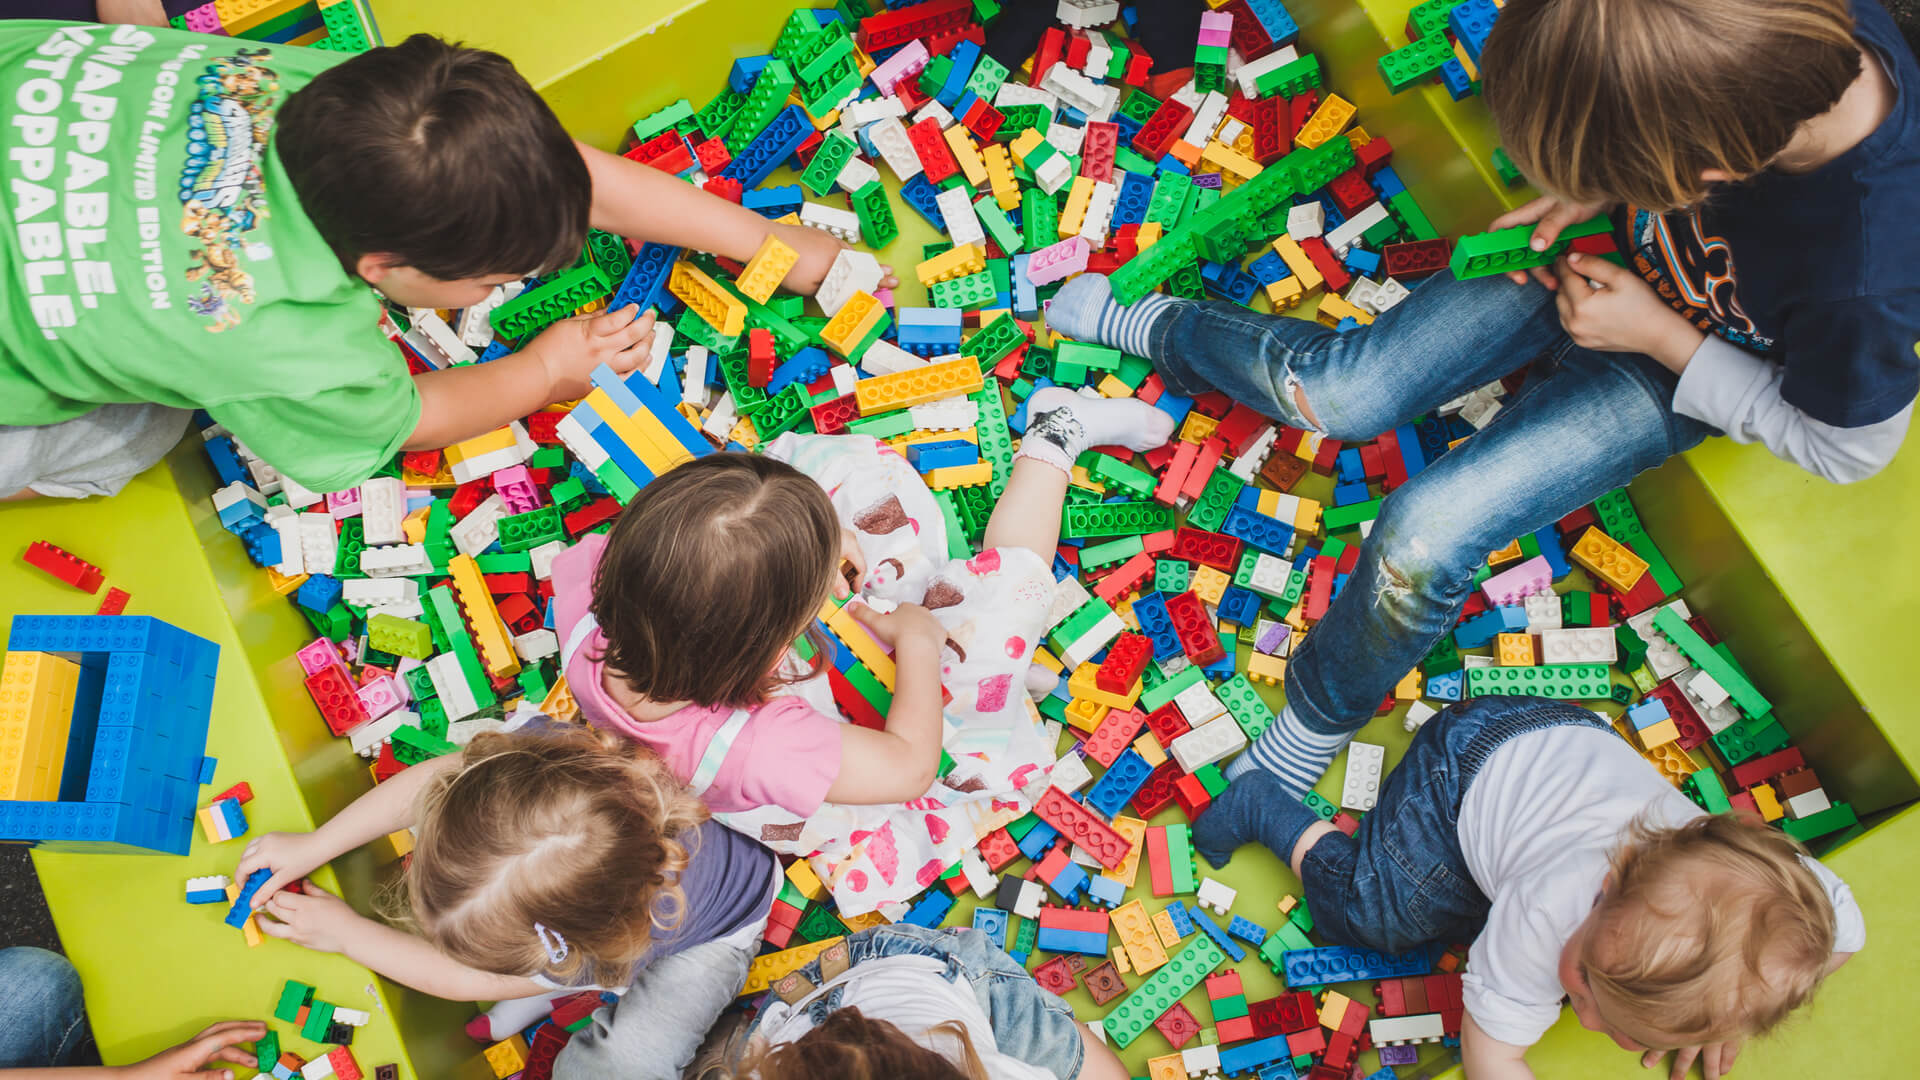 100+ LEGO Activities For Your Kids